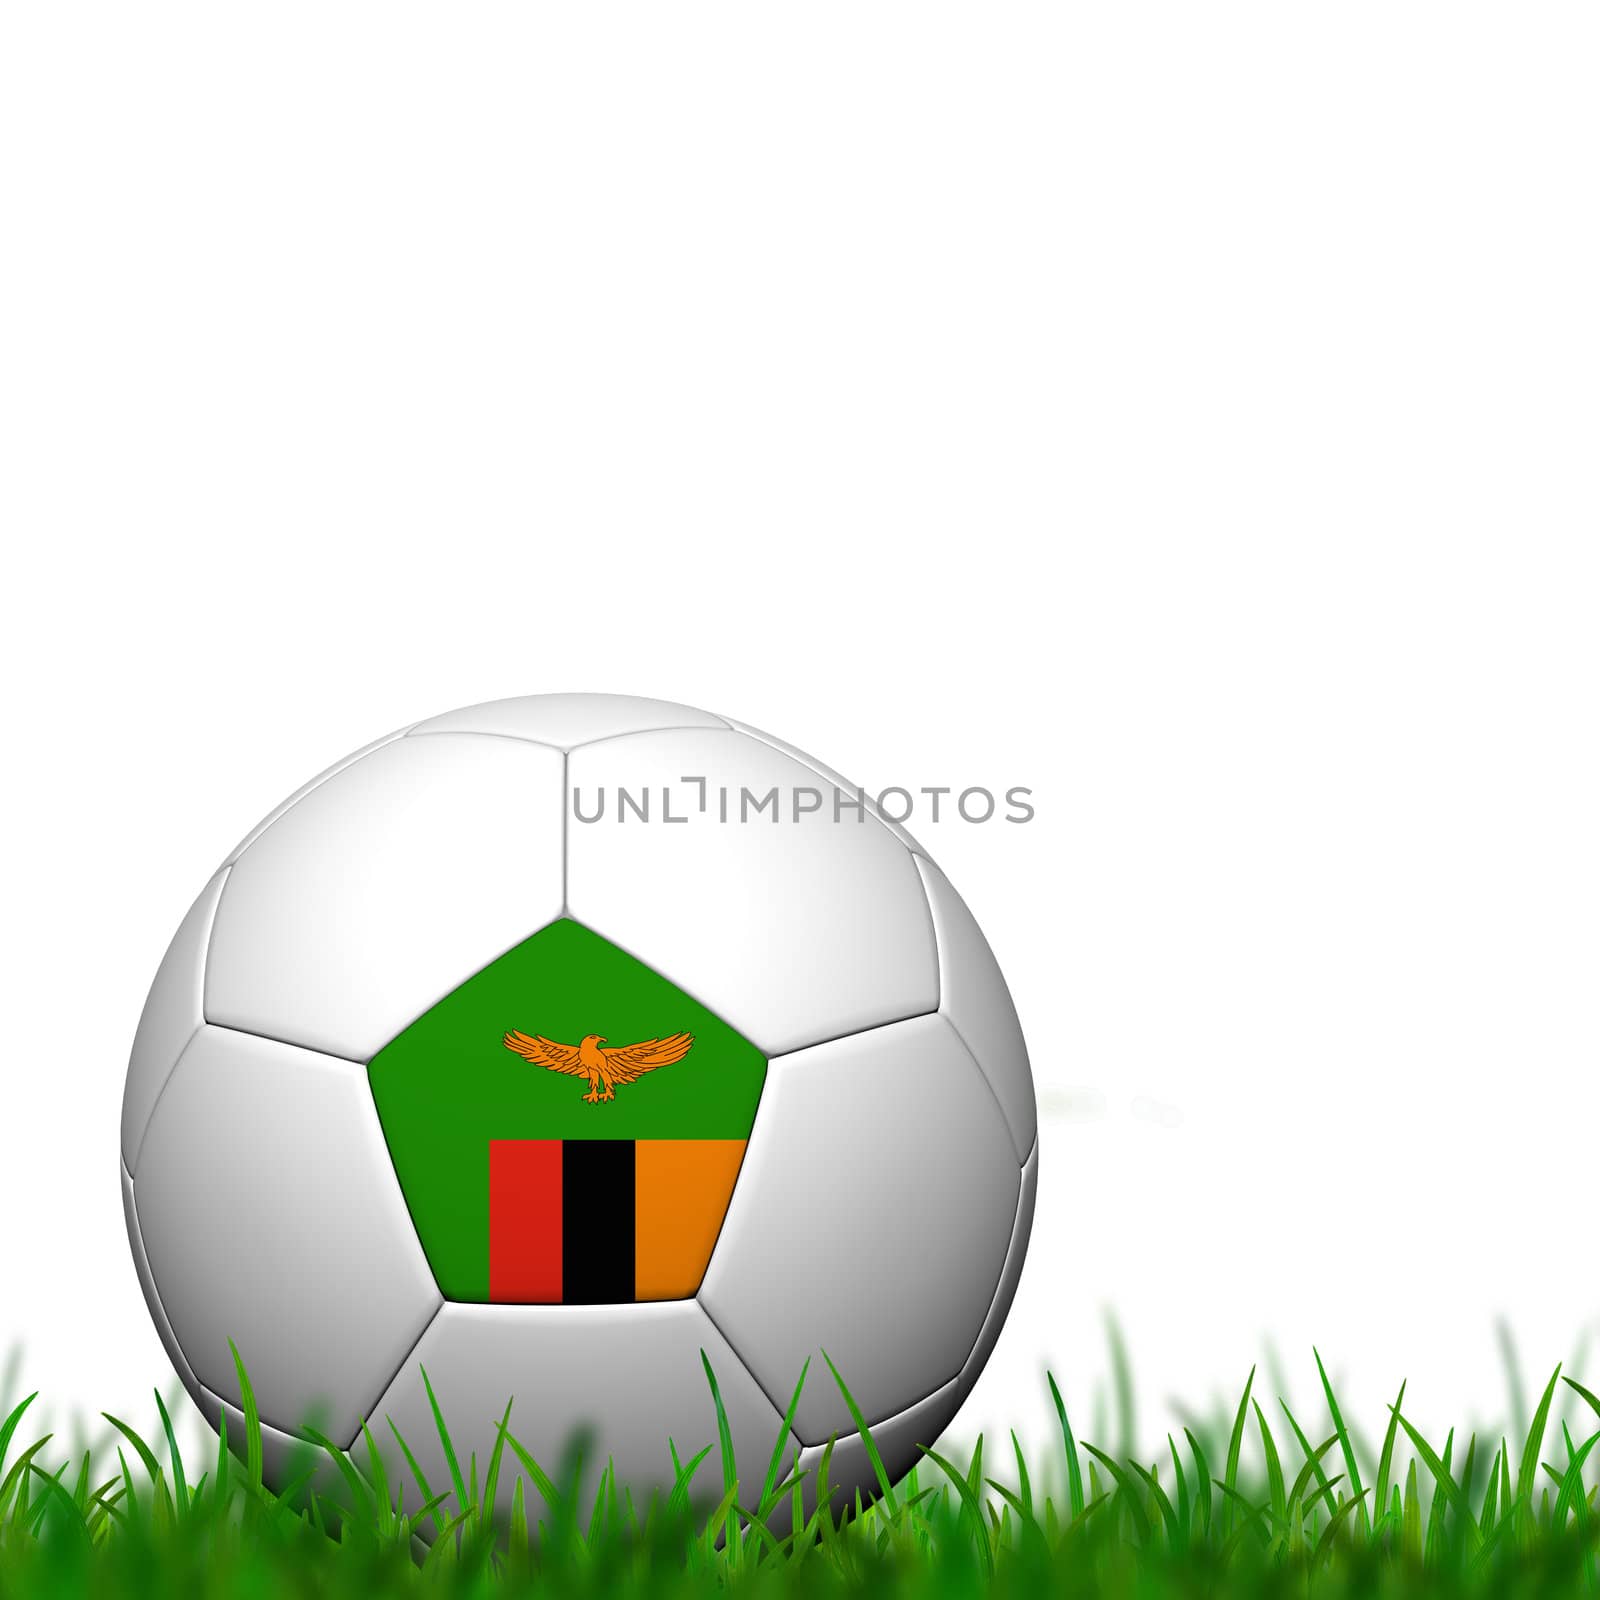 3D Soccer balll Zambia Flag Patter on green grass over white bac by jakgree